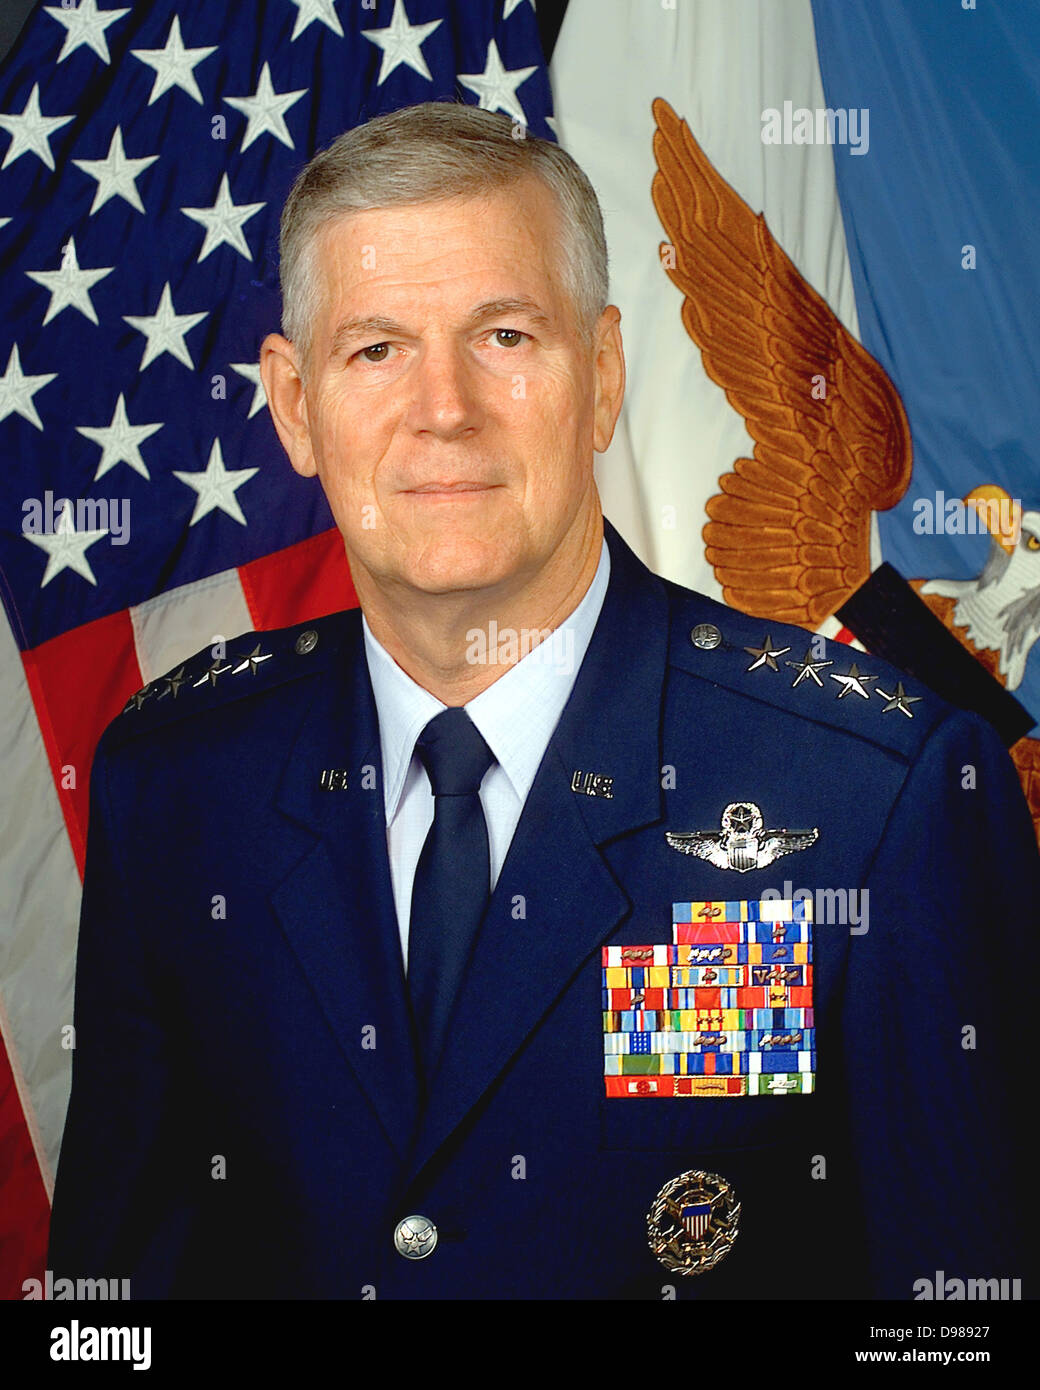 Richard Bowman Myers (born March 1, 1942) general in the United States Air Force and served as the 15th Chairman of the Joint Chiefs of Staff. As Chairman, Myers was the United States military's highest ranking uniformed officer. General Myers became the Chairman of the Joint Chiefs on October 1, 2001 -2005 In this capacity, he served as the principal military advisor to the President, the Secretary of Defense, and the National Security Council during the earliest stages of the War on Terror, including planning and execution of the 2003 invasion of Iraq. Stock Photo